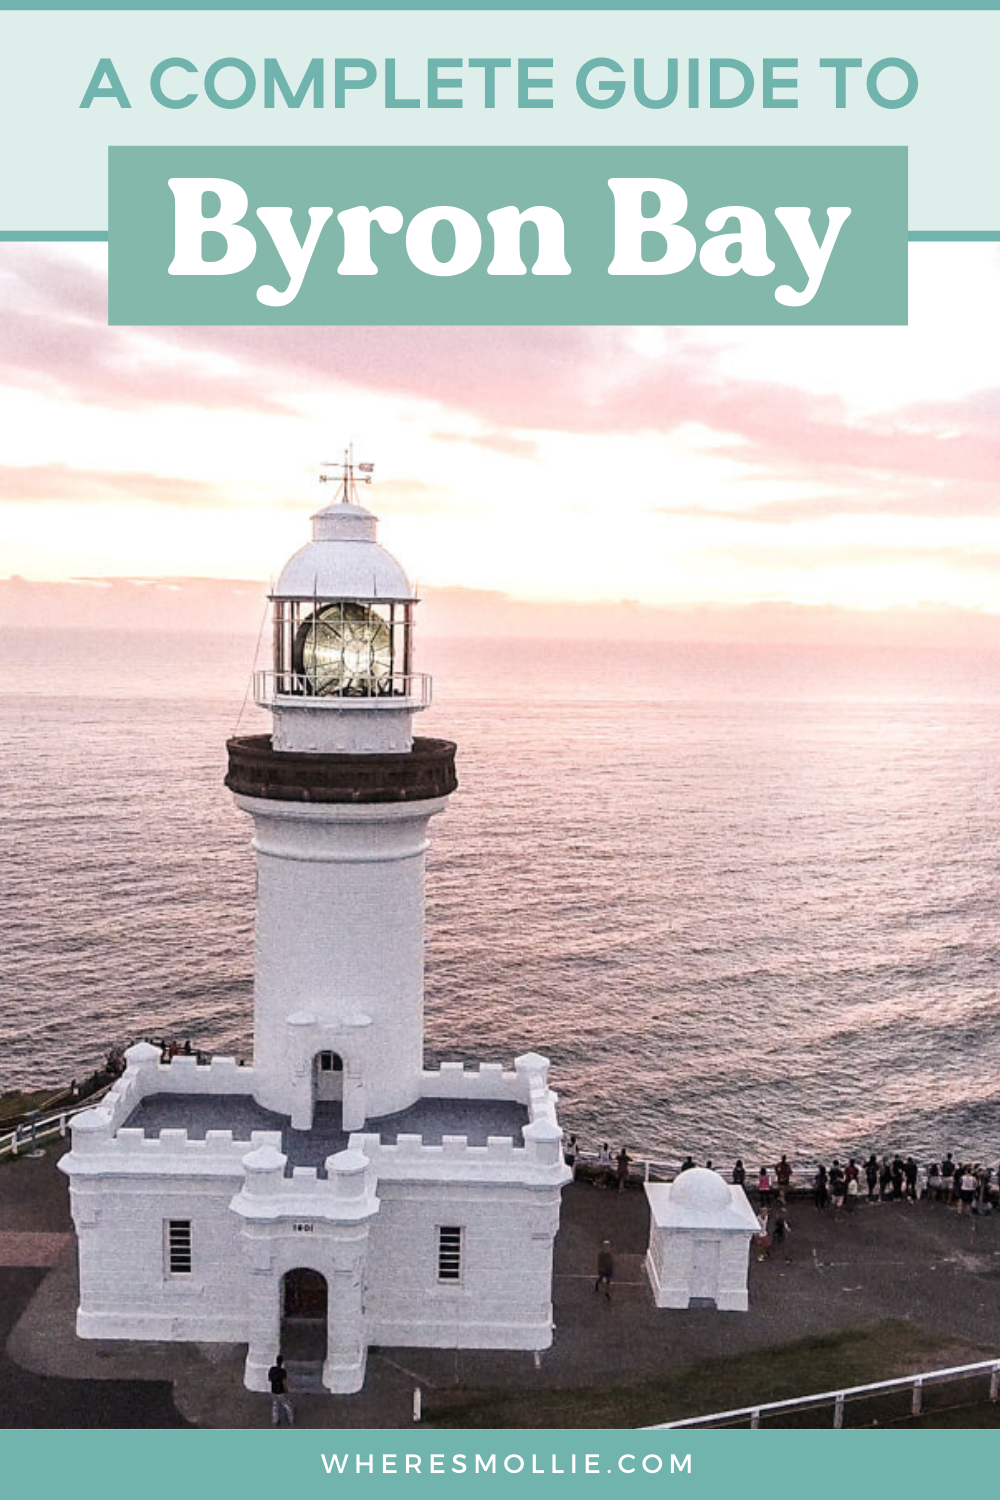 A complete guide to Byron Bay, Australia